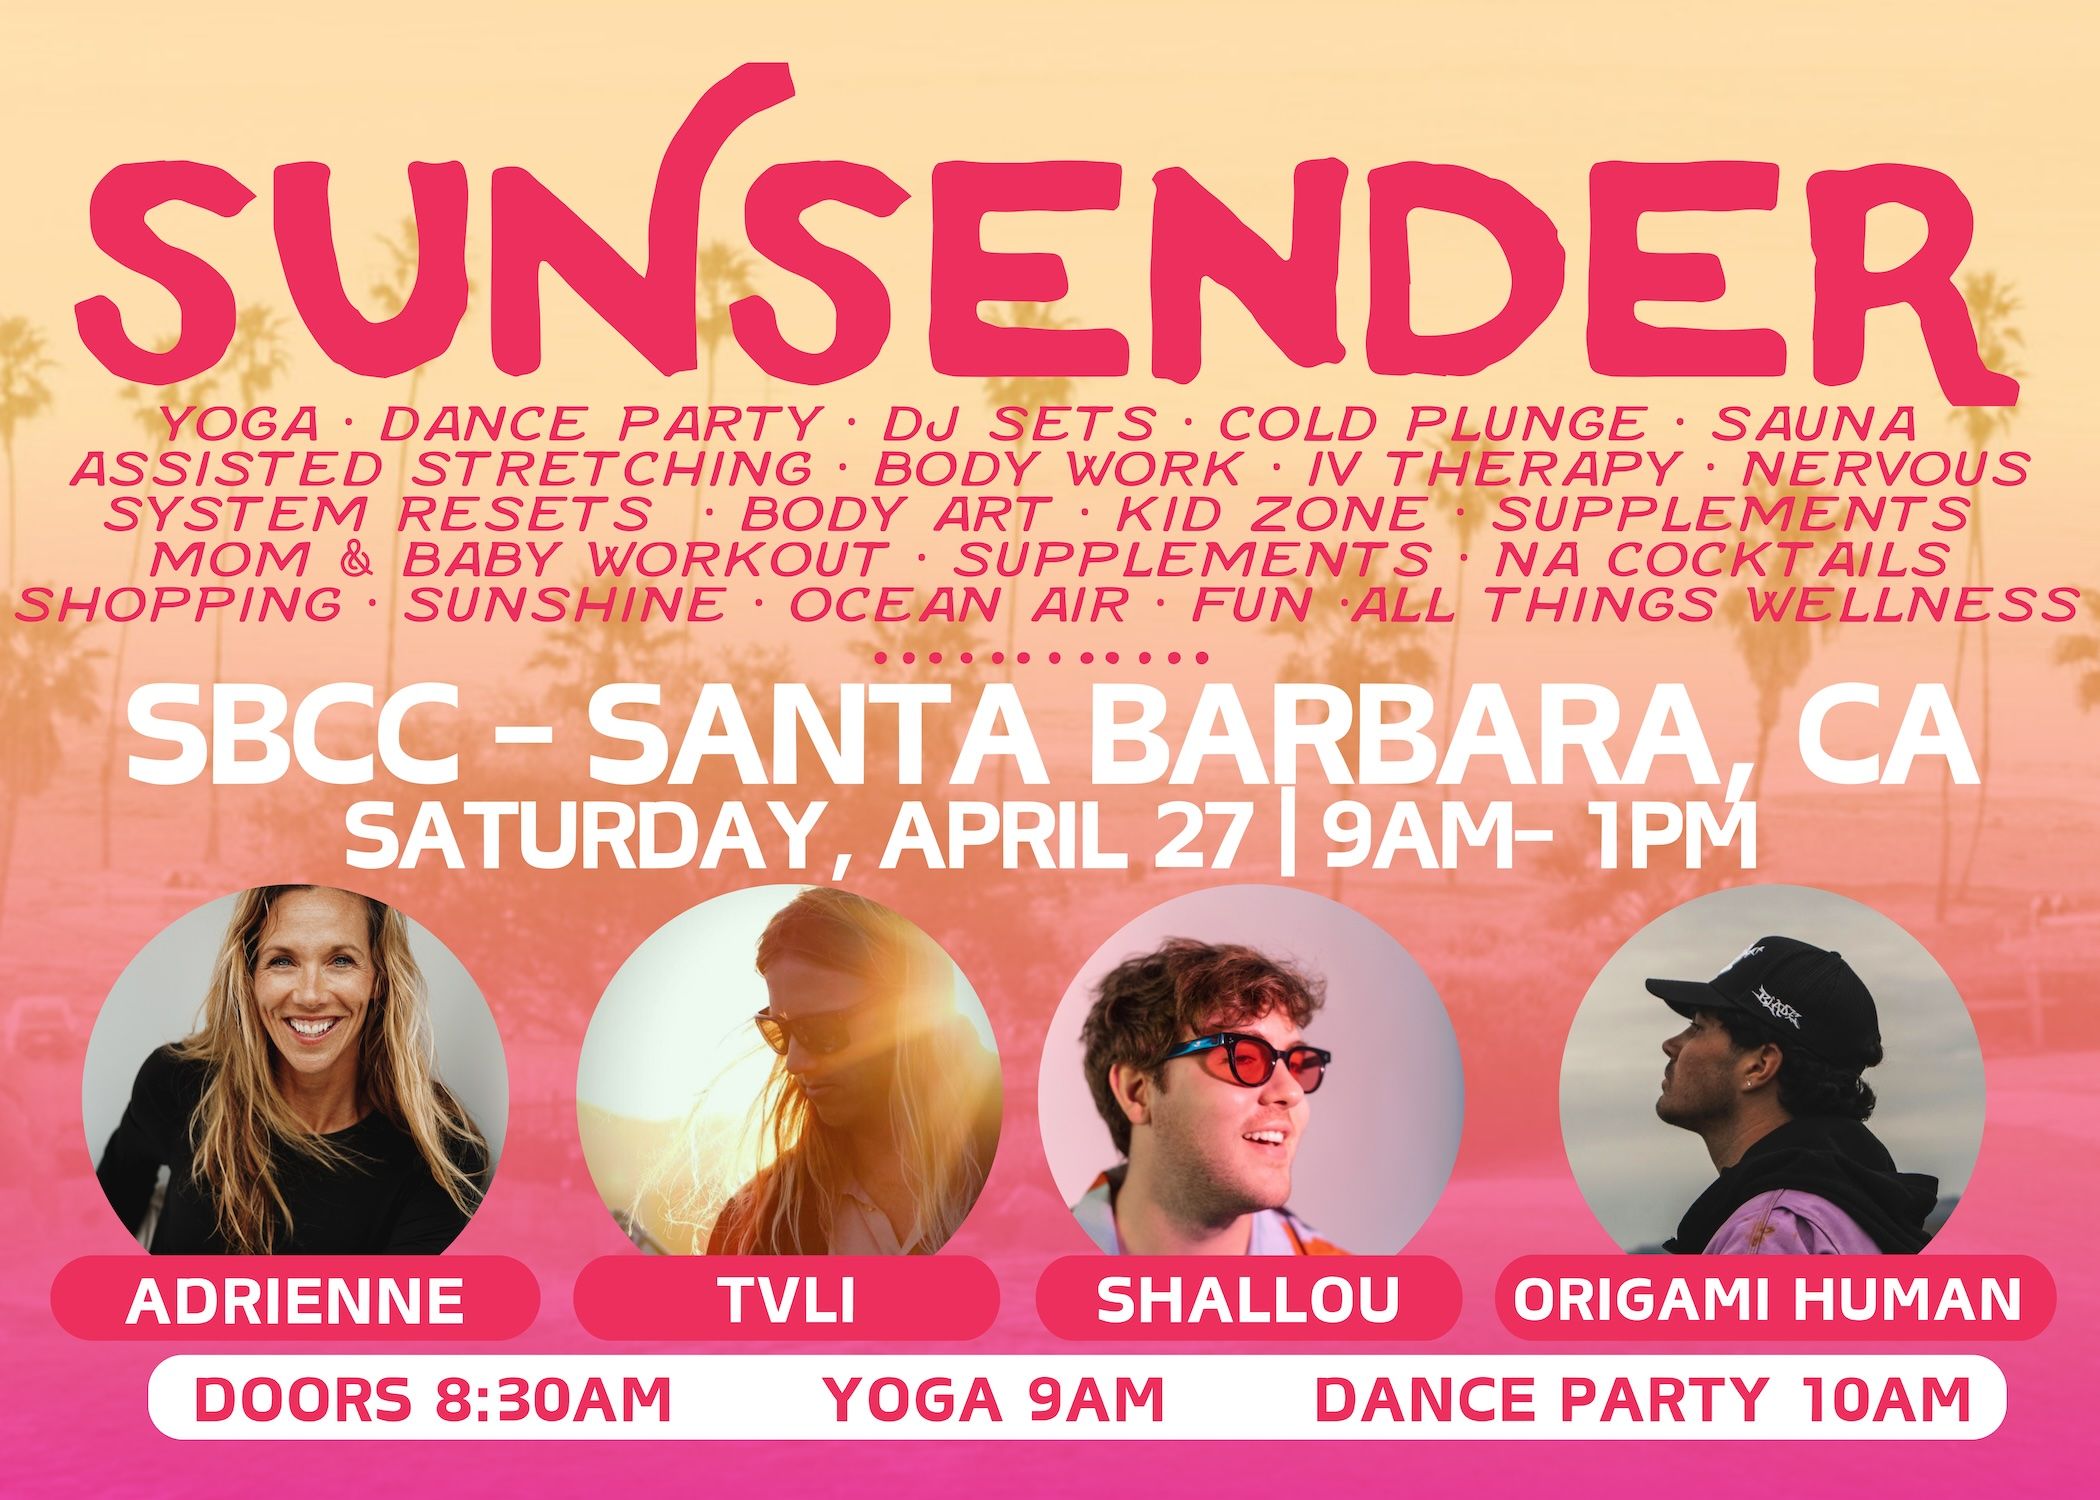 A colorful poster for SUNSENDER, a yoga event in Santa Barbara CA